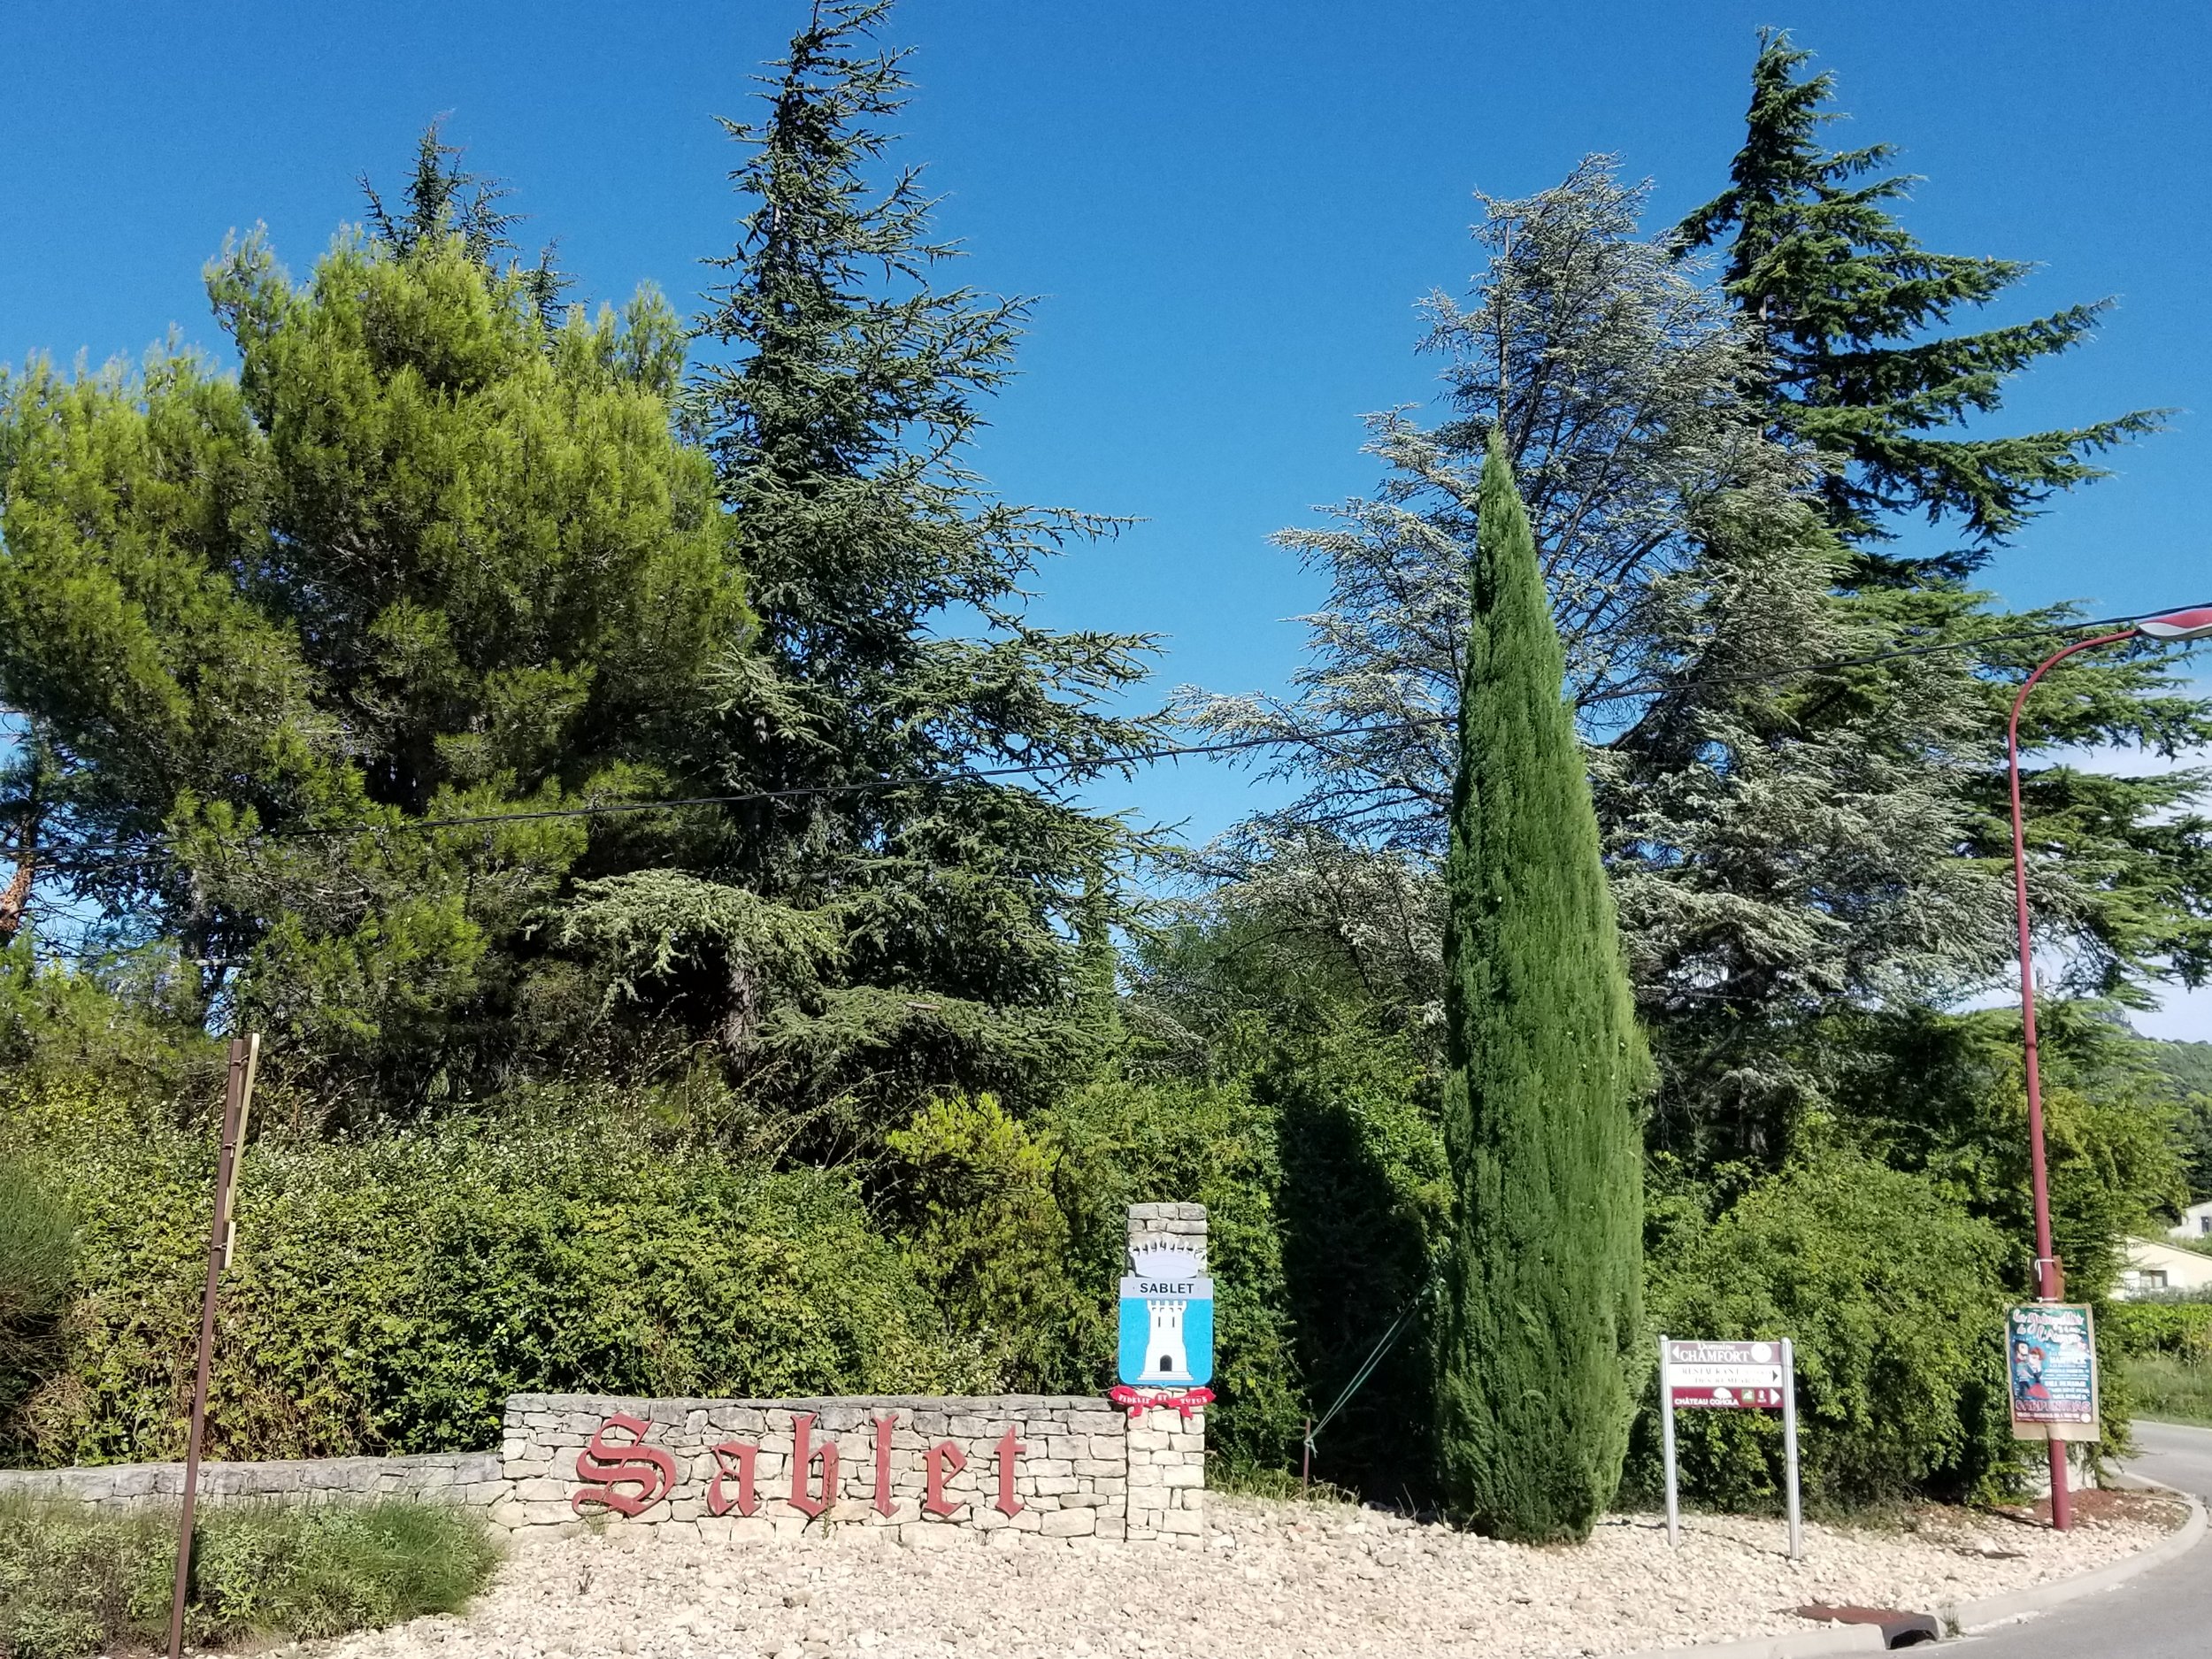 One of several entrances to the village of Sablet